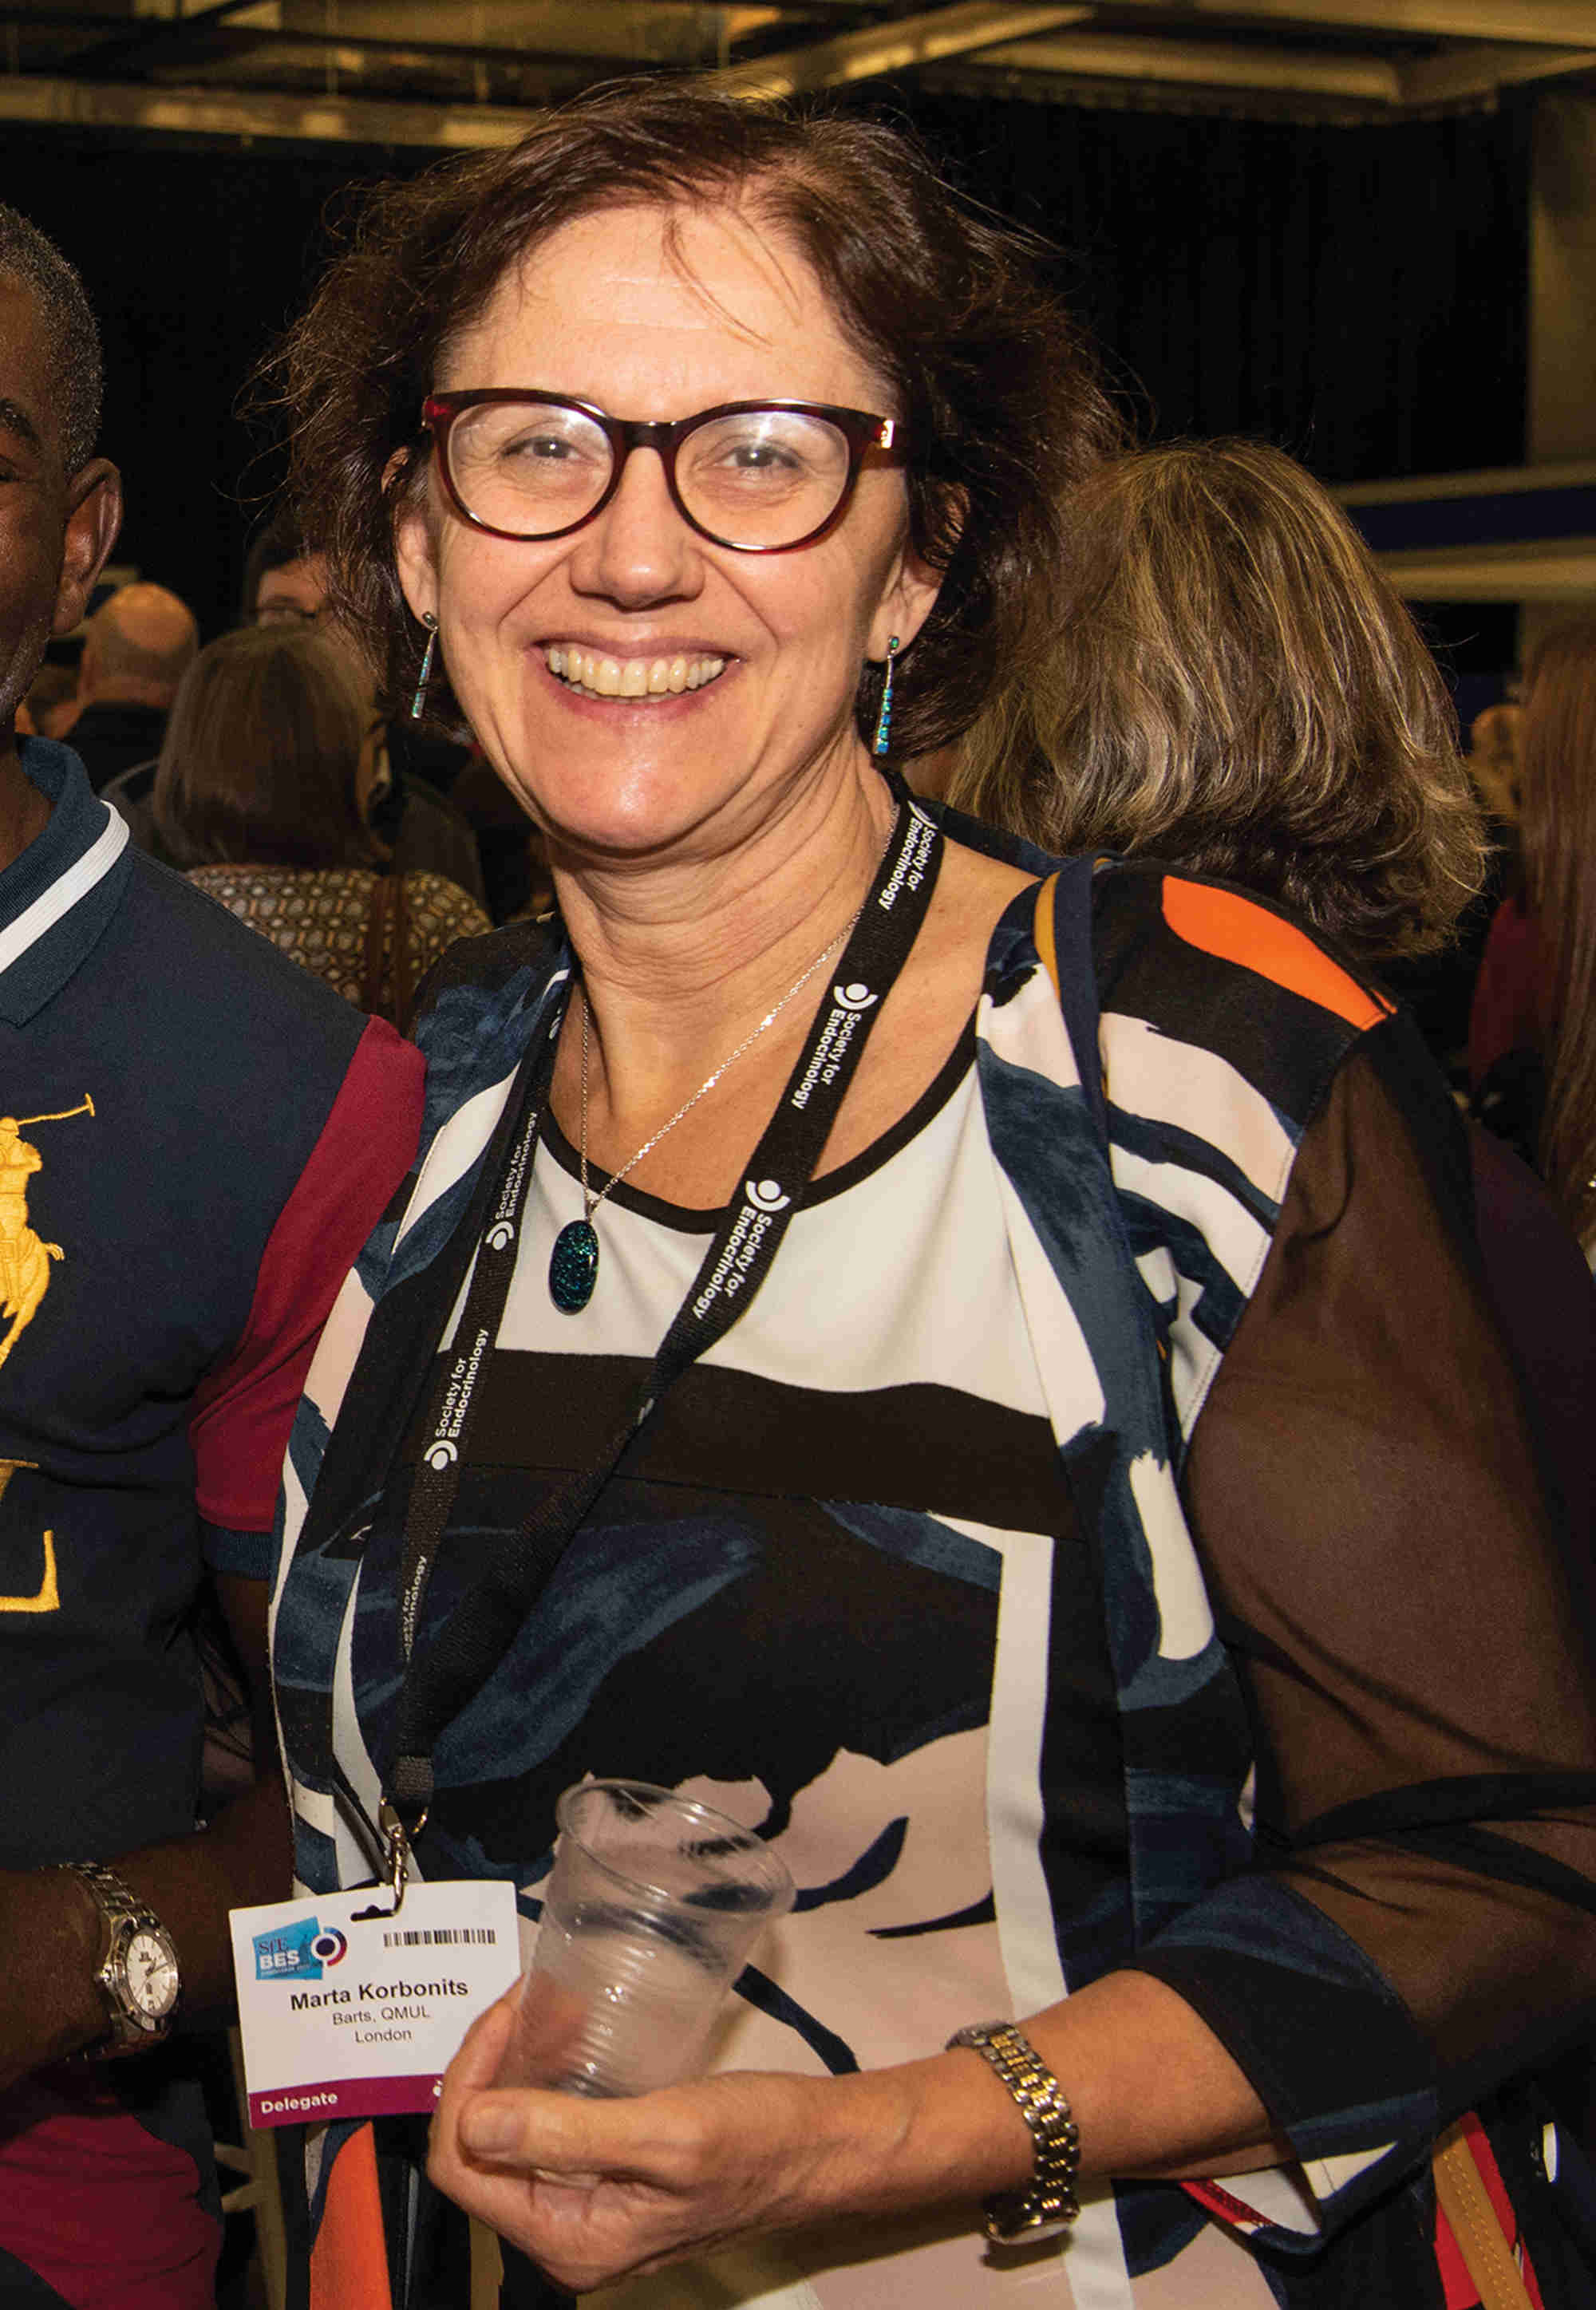 Márta Korbonits, President of the Society for Endocrinology from November 2022